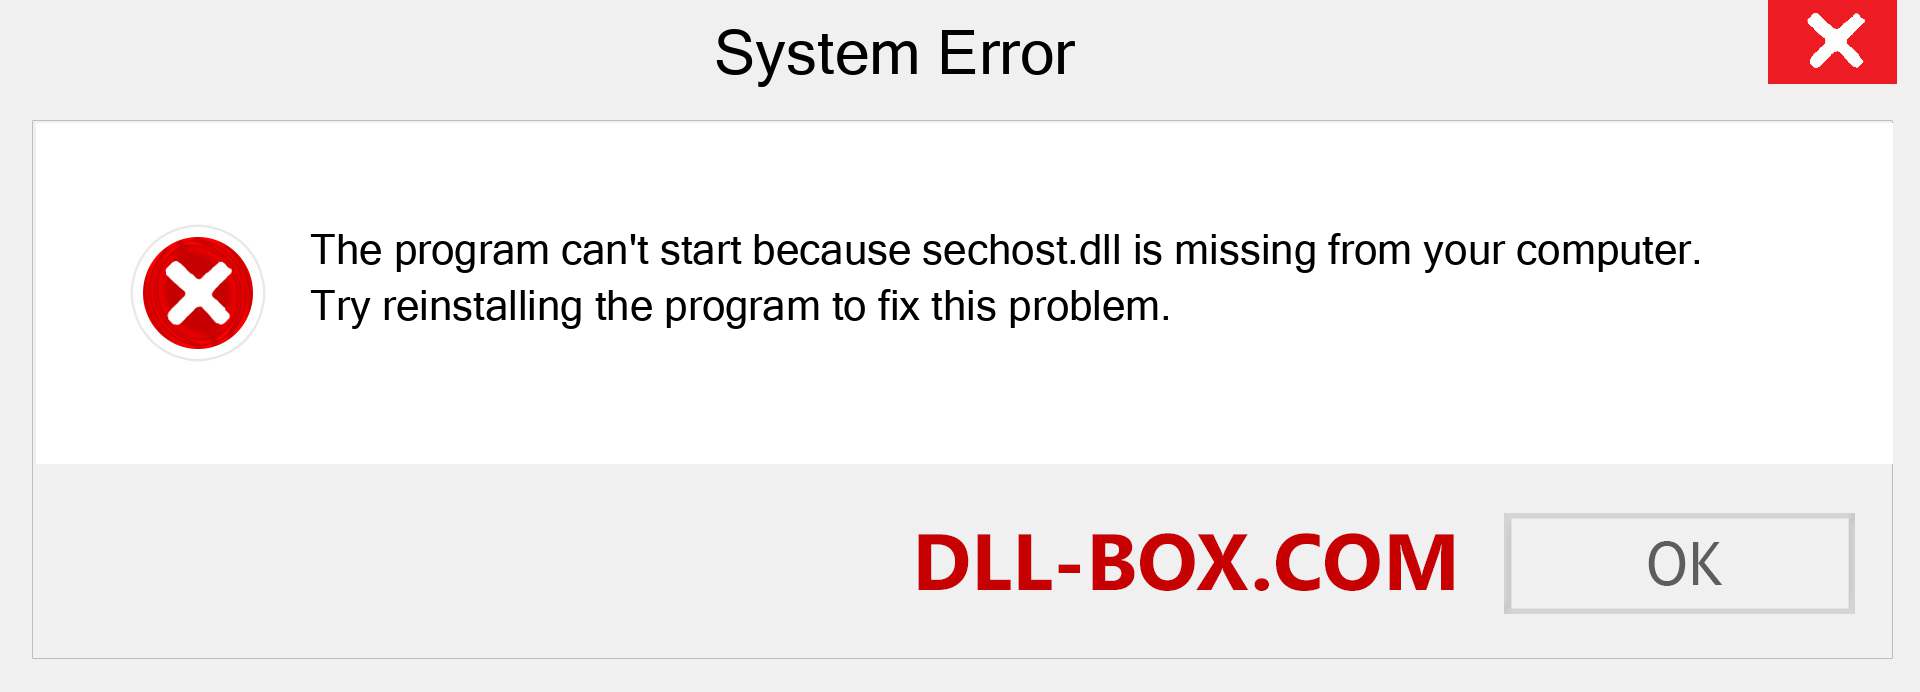  sechost.dll file is missing?. Download for Windows 7, 8, 10 - Fix  sechost dll Missing Error on Windows, photos, images